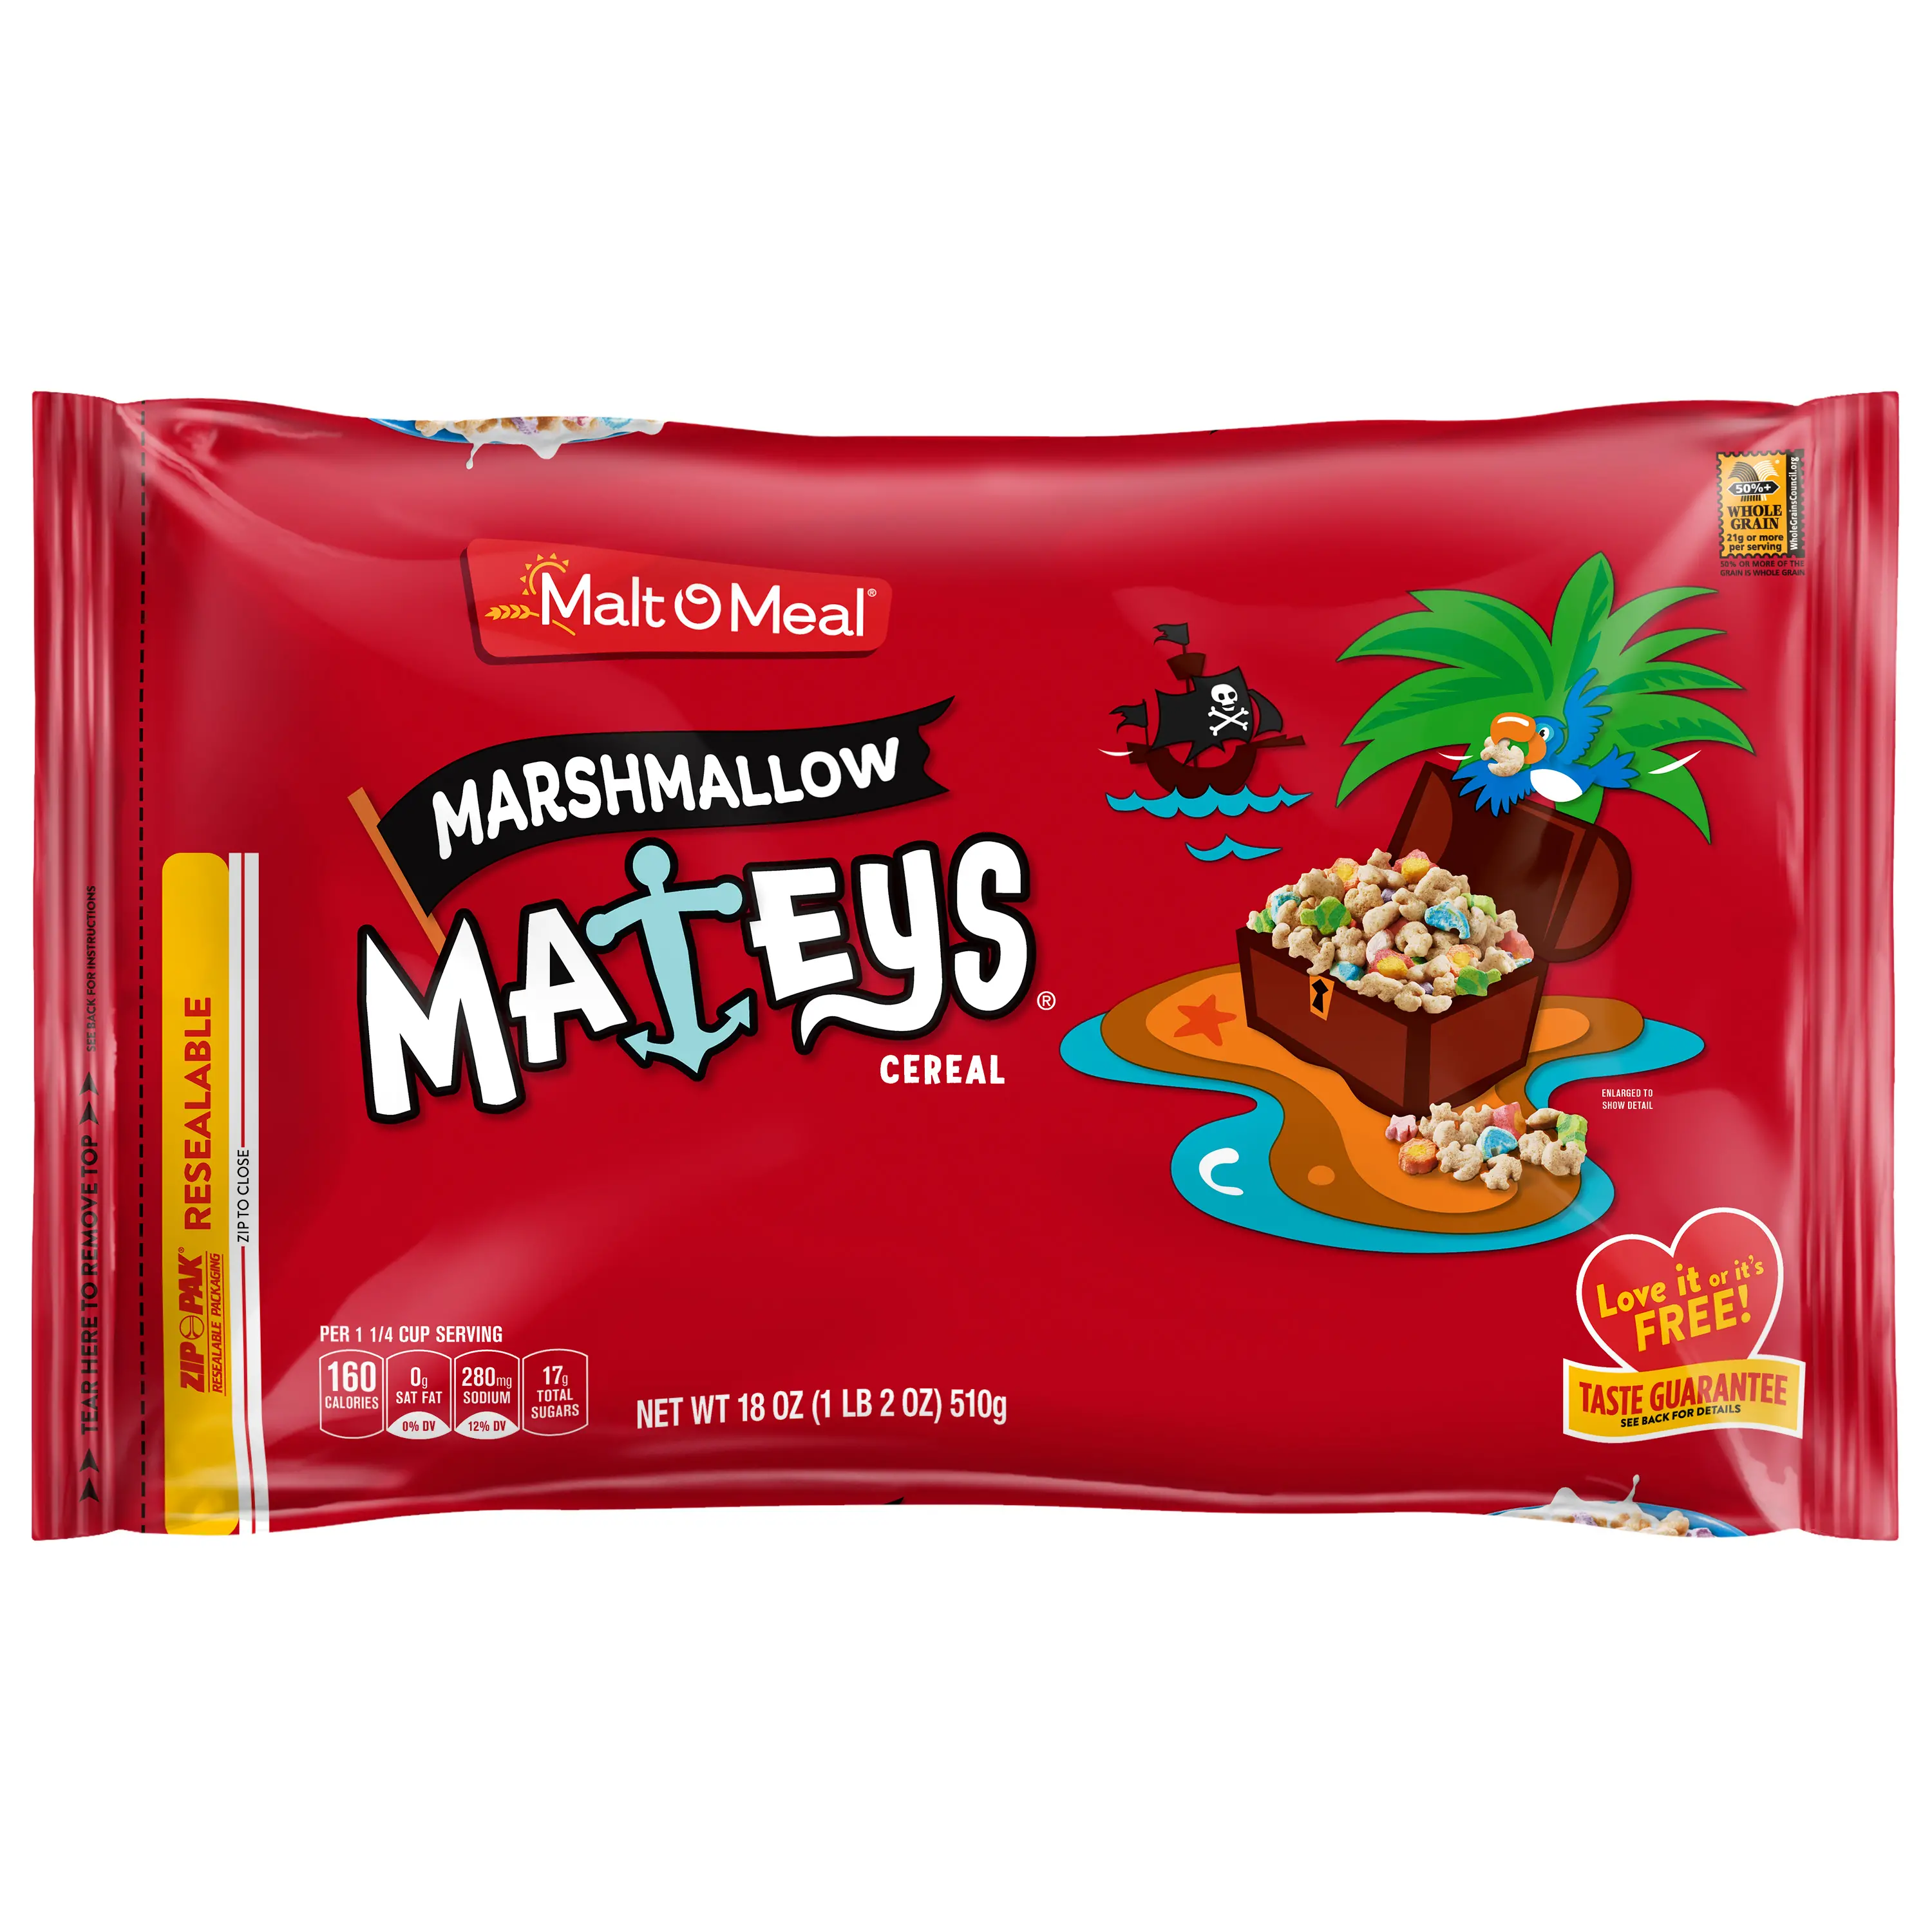 Malt-O-Meal Marshmallow Matey's cereal